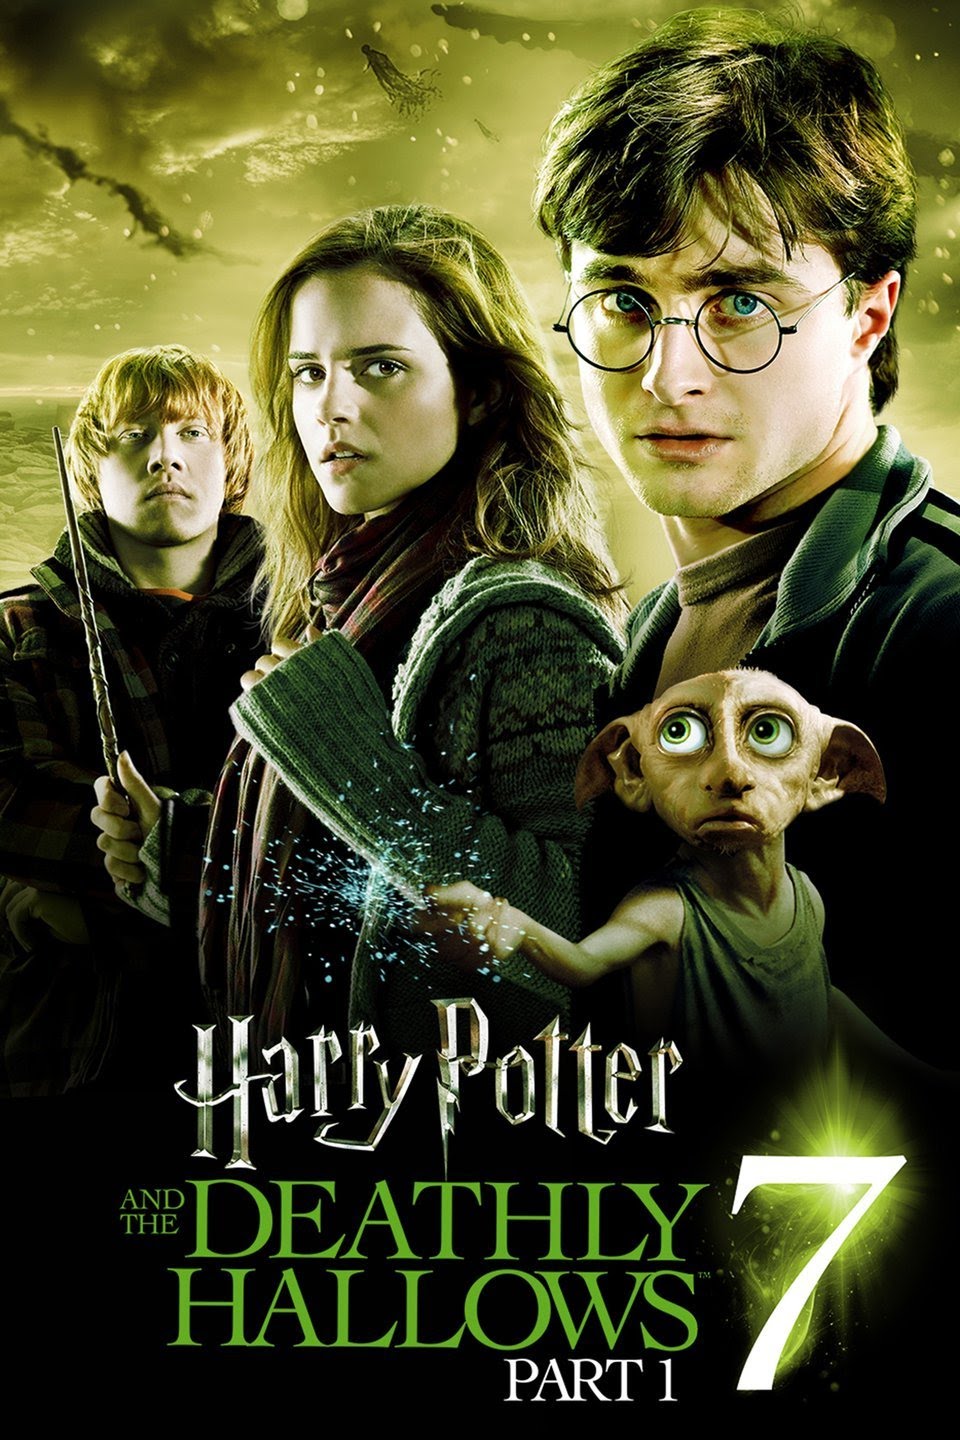 Harry potter and the Deathly Hallows part 1